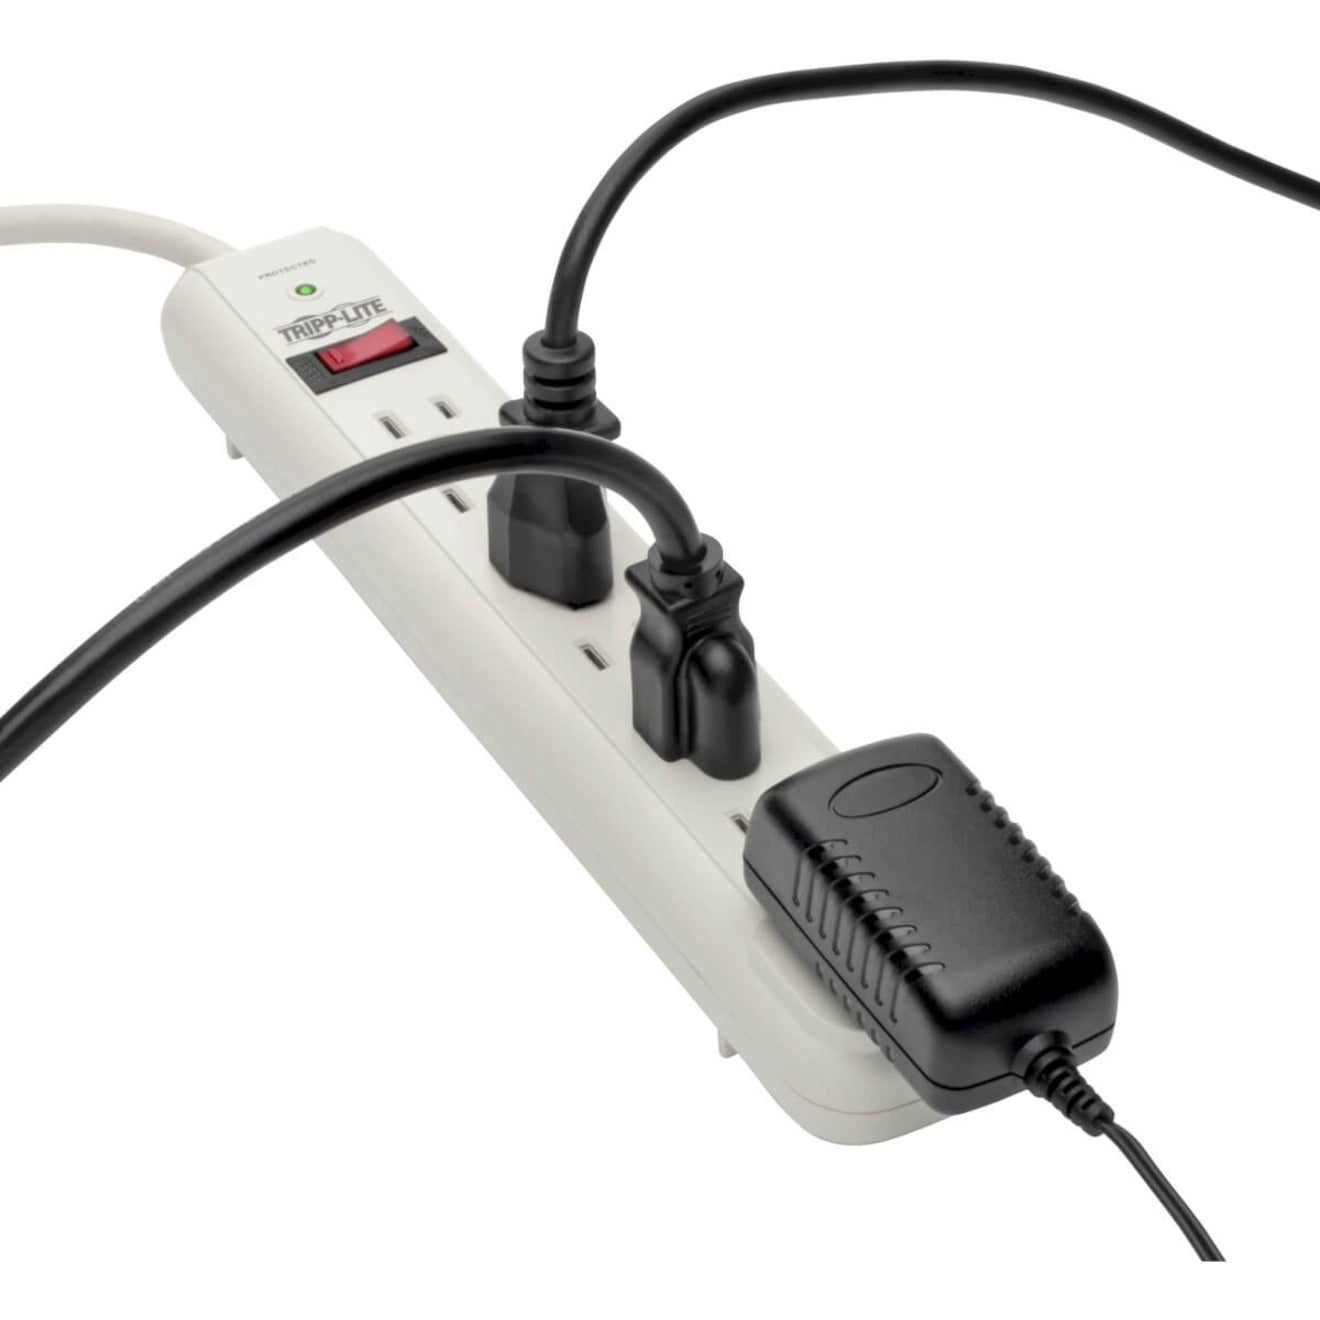 Tripp Lite TLP712 Protect It! 7-Outlet Surge Protector, 1080 Joules, 12' Cord, White